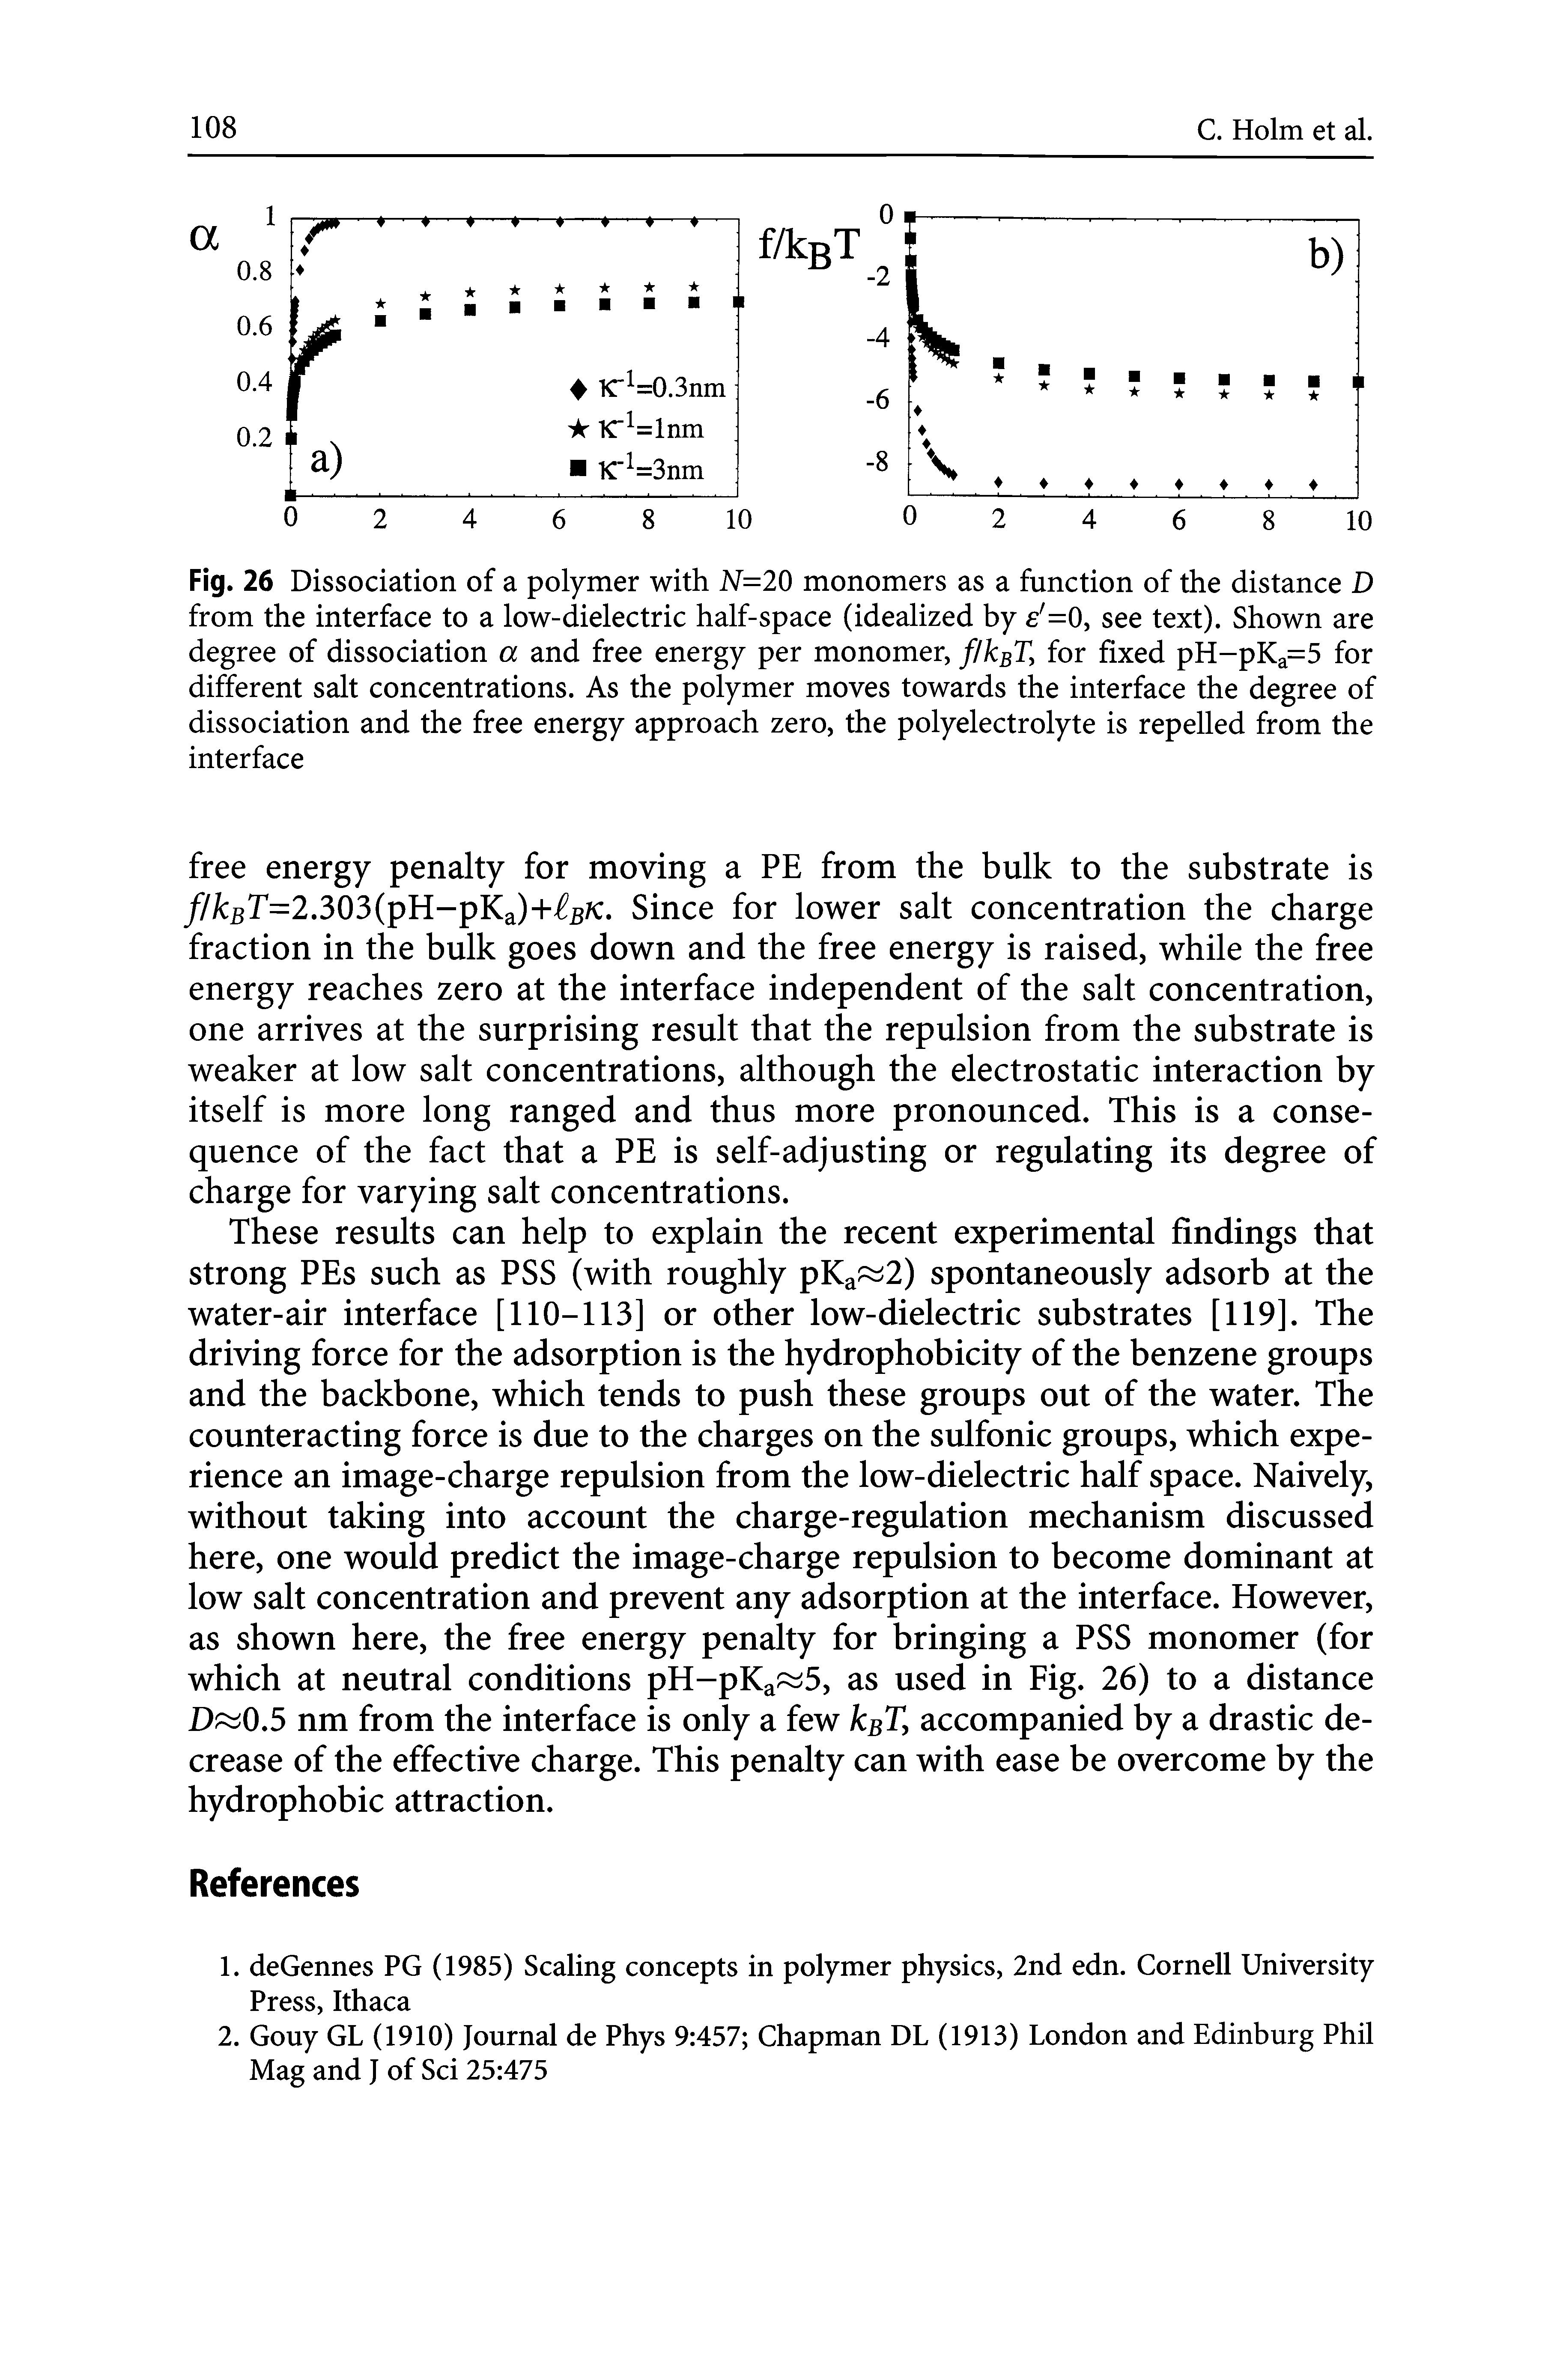 Fig. 26 Dissociation of a polymer with N=20 monomers as a function of the distance D from the interface to a low-dielectric half-space (idealized by =0, see text). Shown are degree of dissociation a and free energy per monomer, f/kBT for fixed pH-pKa=5 for different salt concentrations. As the polymer moves towards the interface the degree of dissociation and the free energy approach zero, the polyelectrolyte is repelled from the interface...